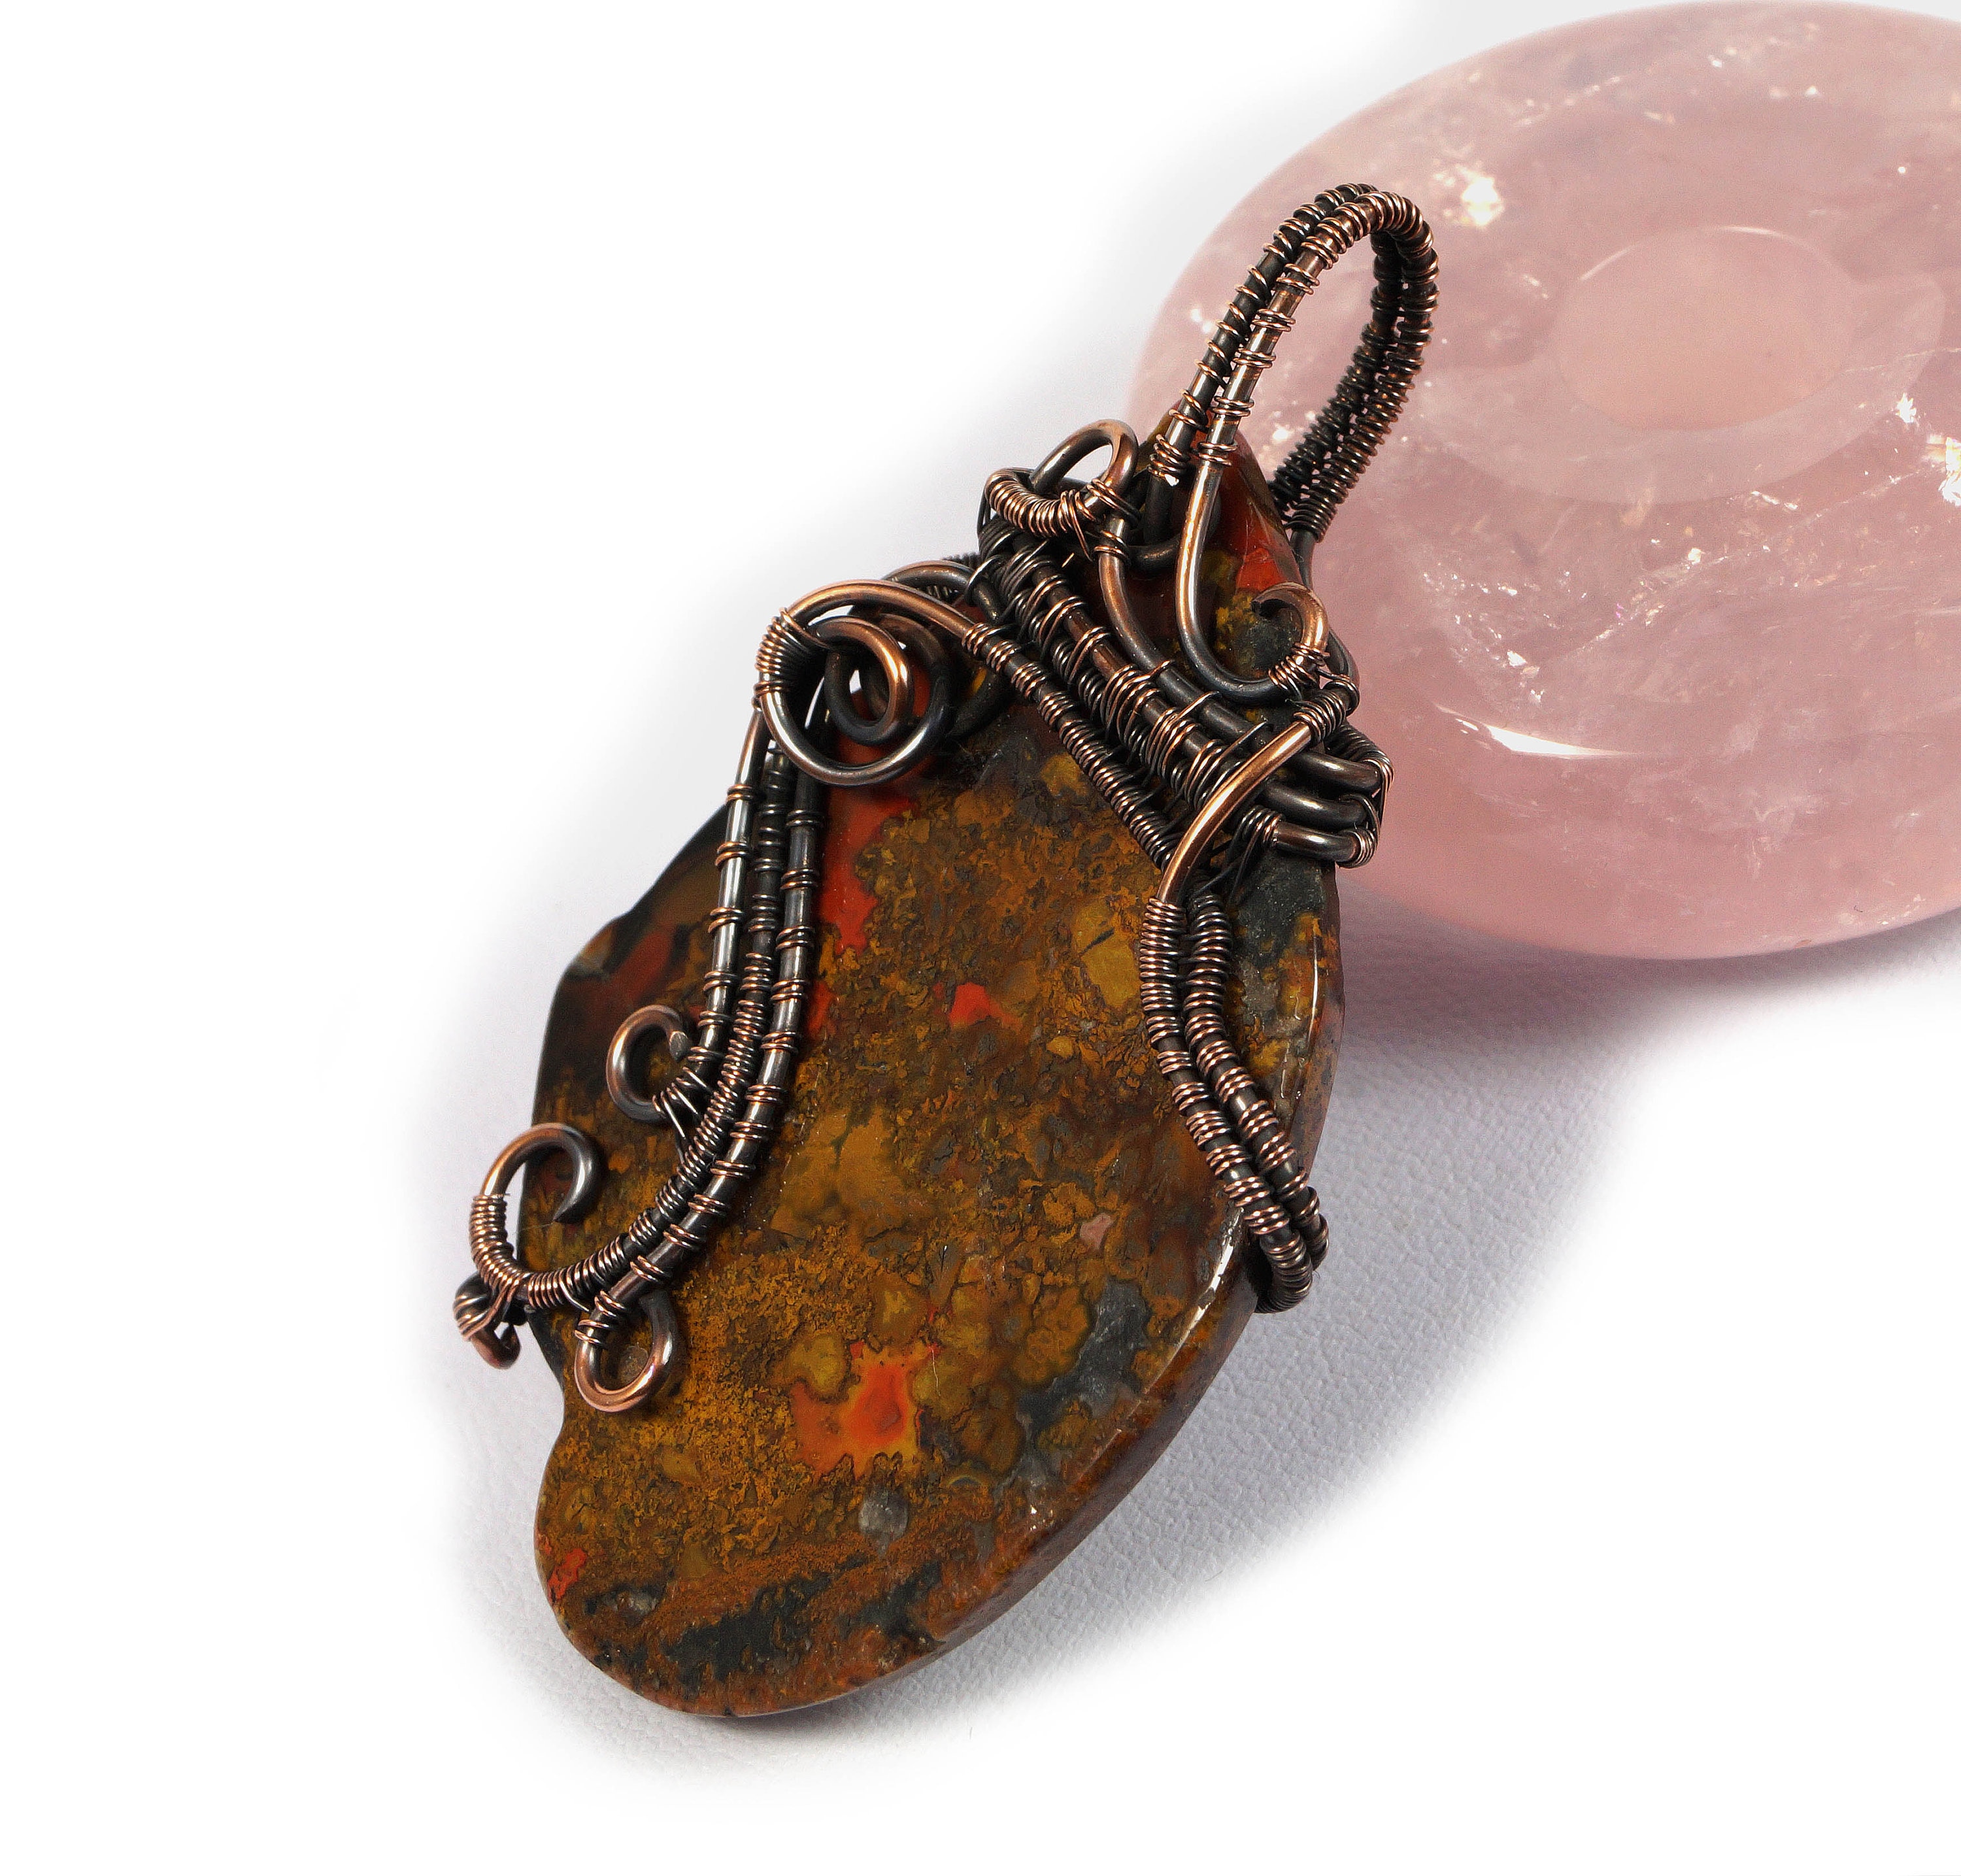 Handmade Jewelry Unique Gemstone Necklace Brown Agate Slice Antique Copper Wire Wrapped Pendant Unisex Gift